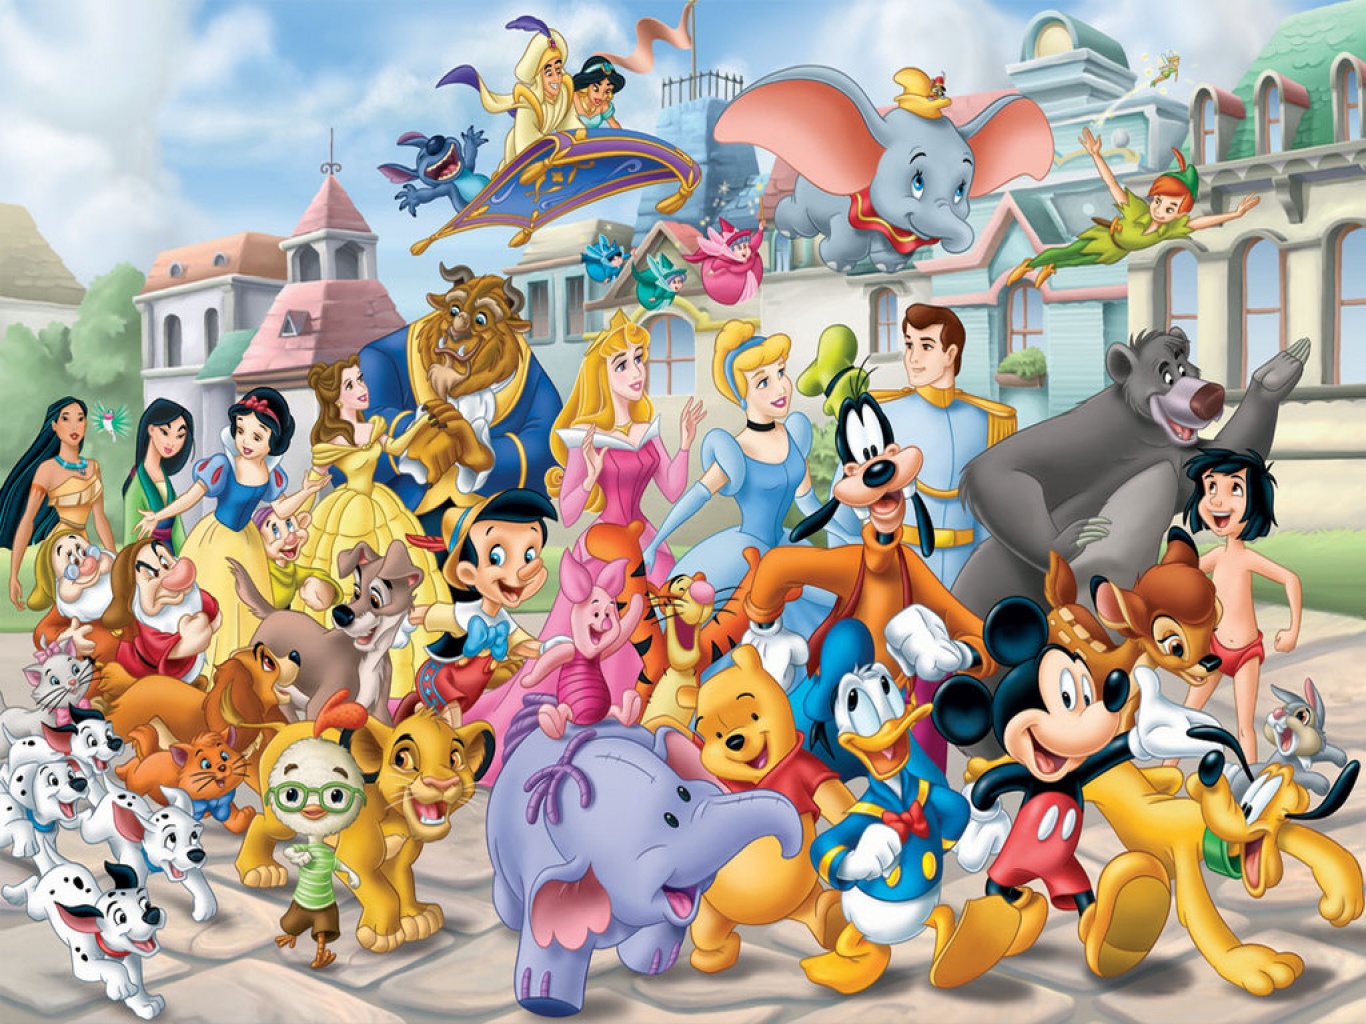  wallpapers wallpaper free download many disney characters free disney